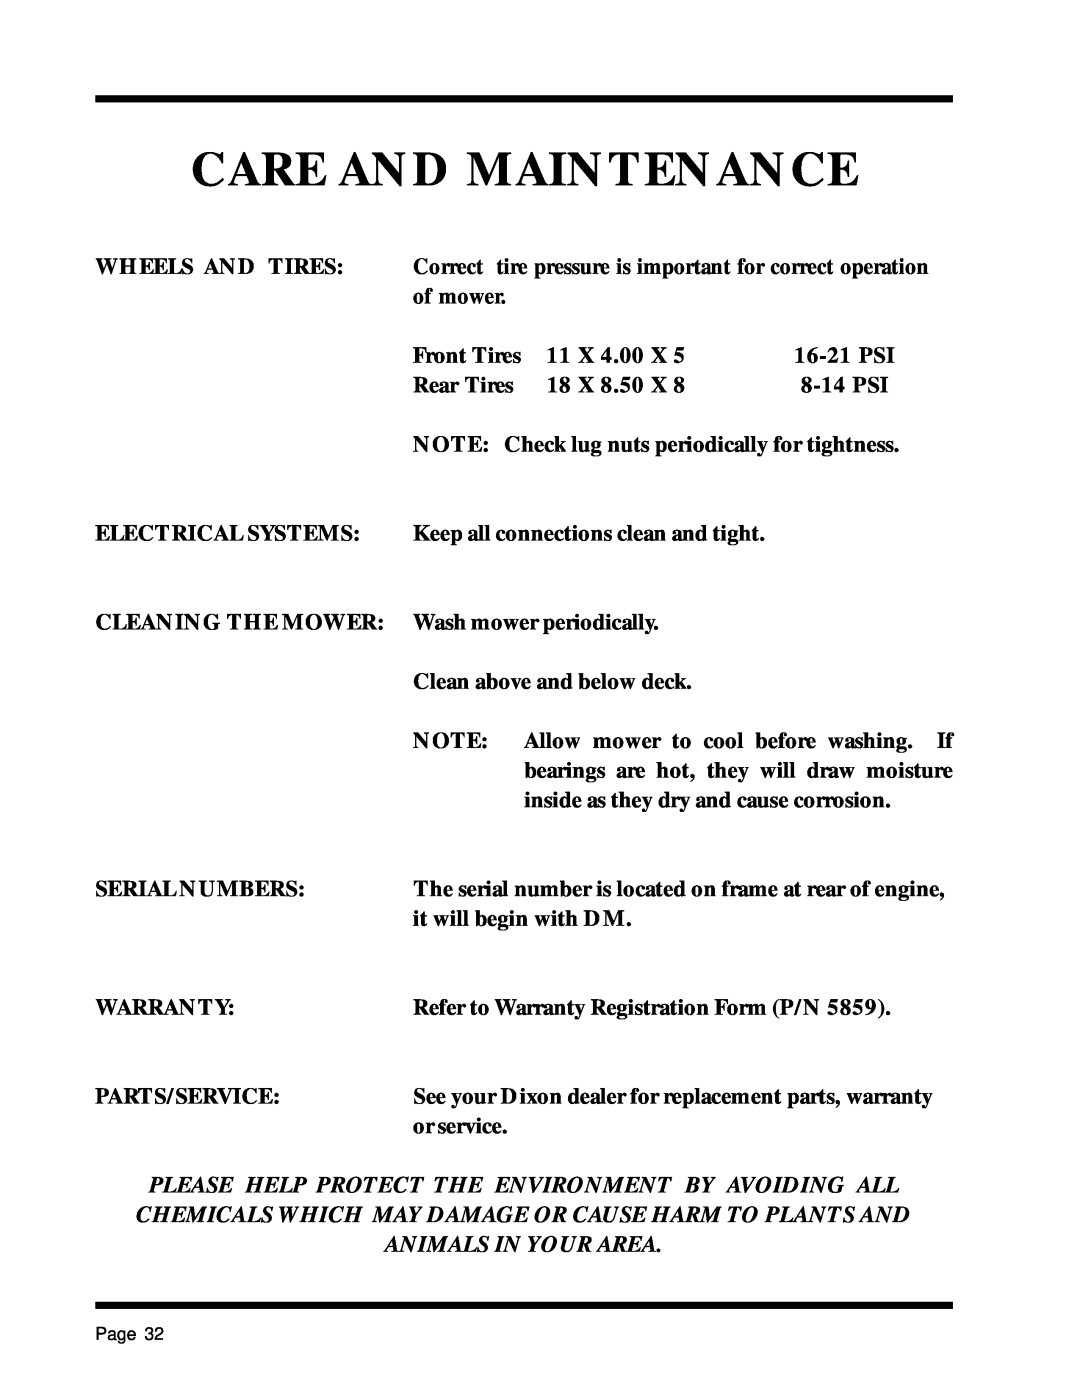 Dixon 1857-0599 manual Care And Maintenance, Wheels And Tires 